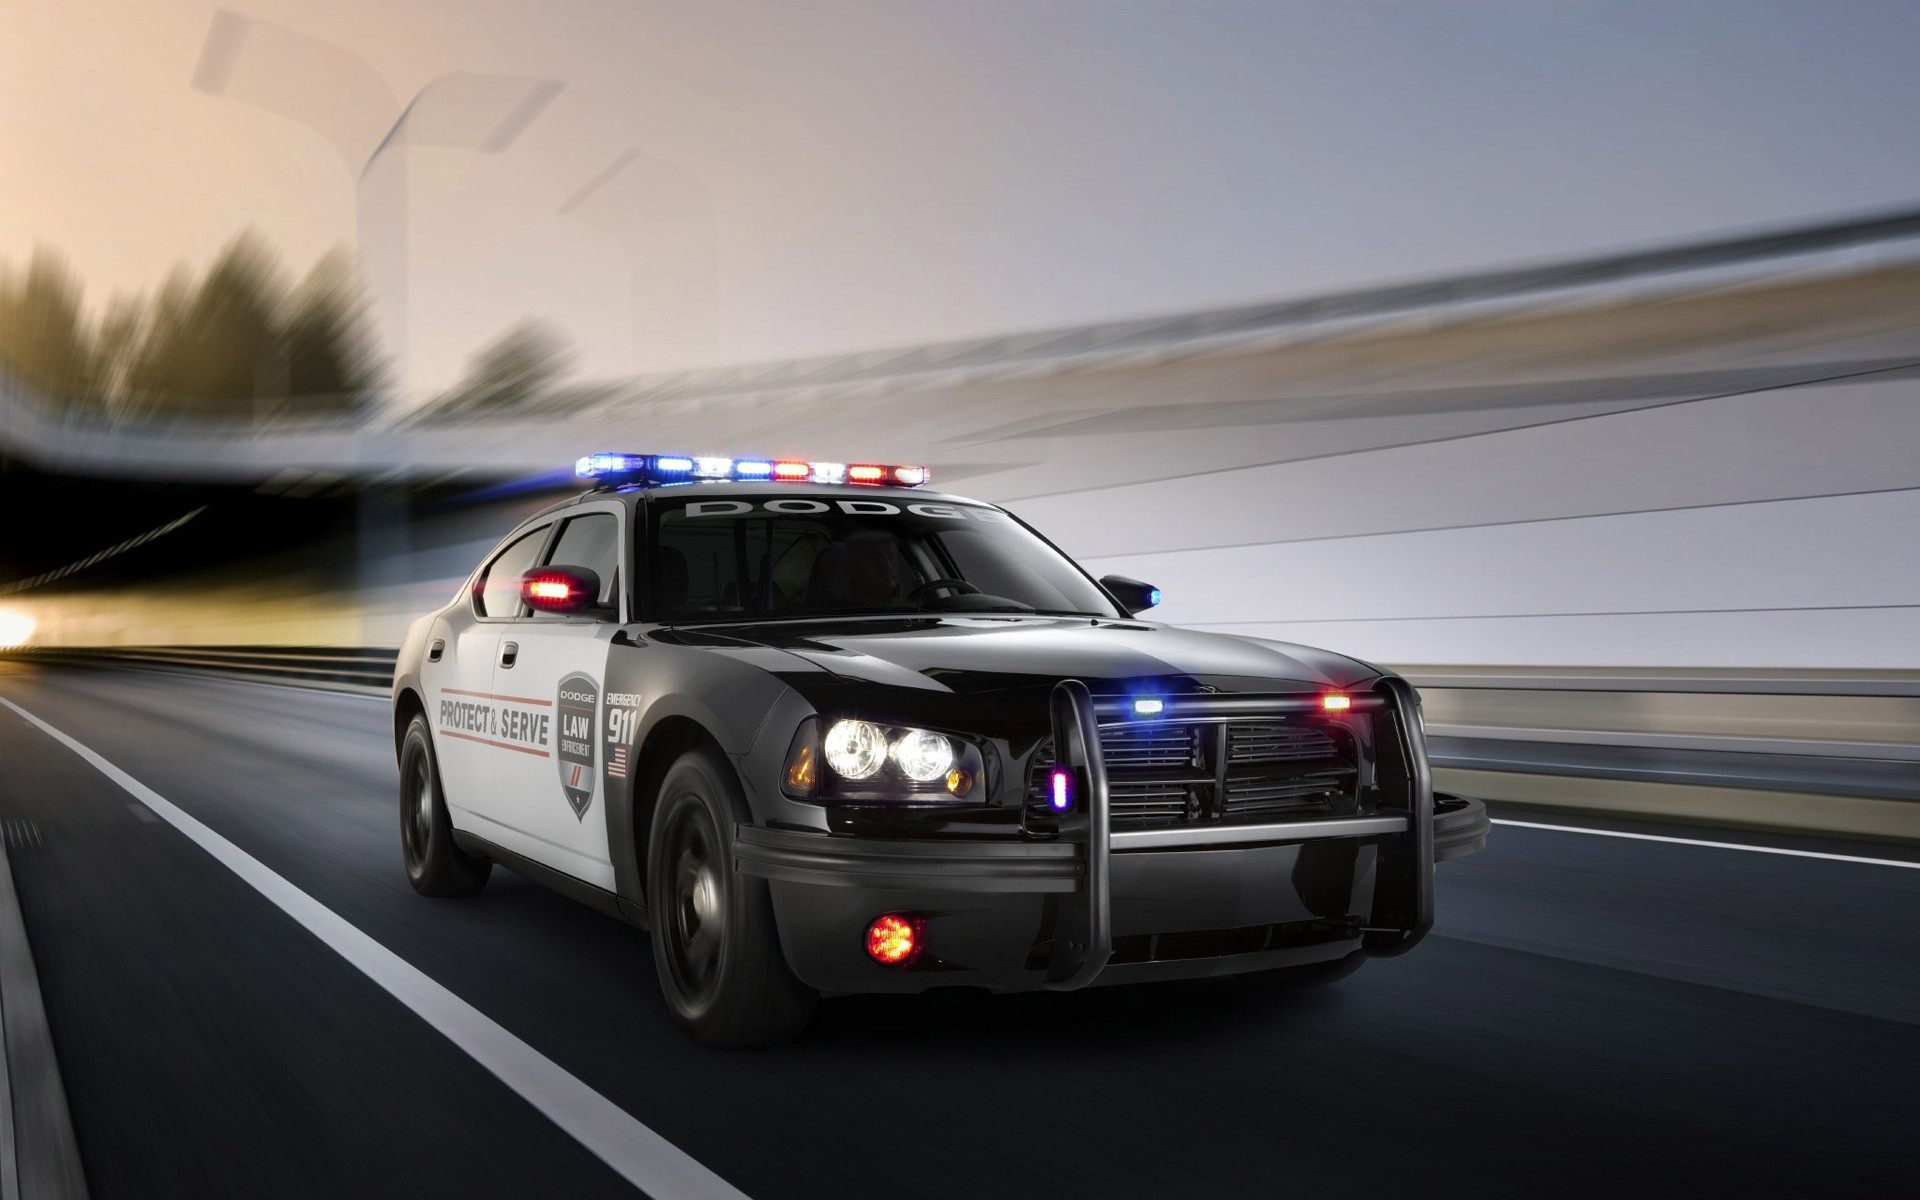 2011 Dodge Charger Pursuit police muscle wallpaper 104396 WallpaperUP